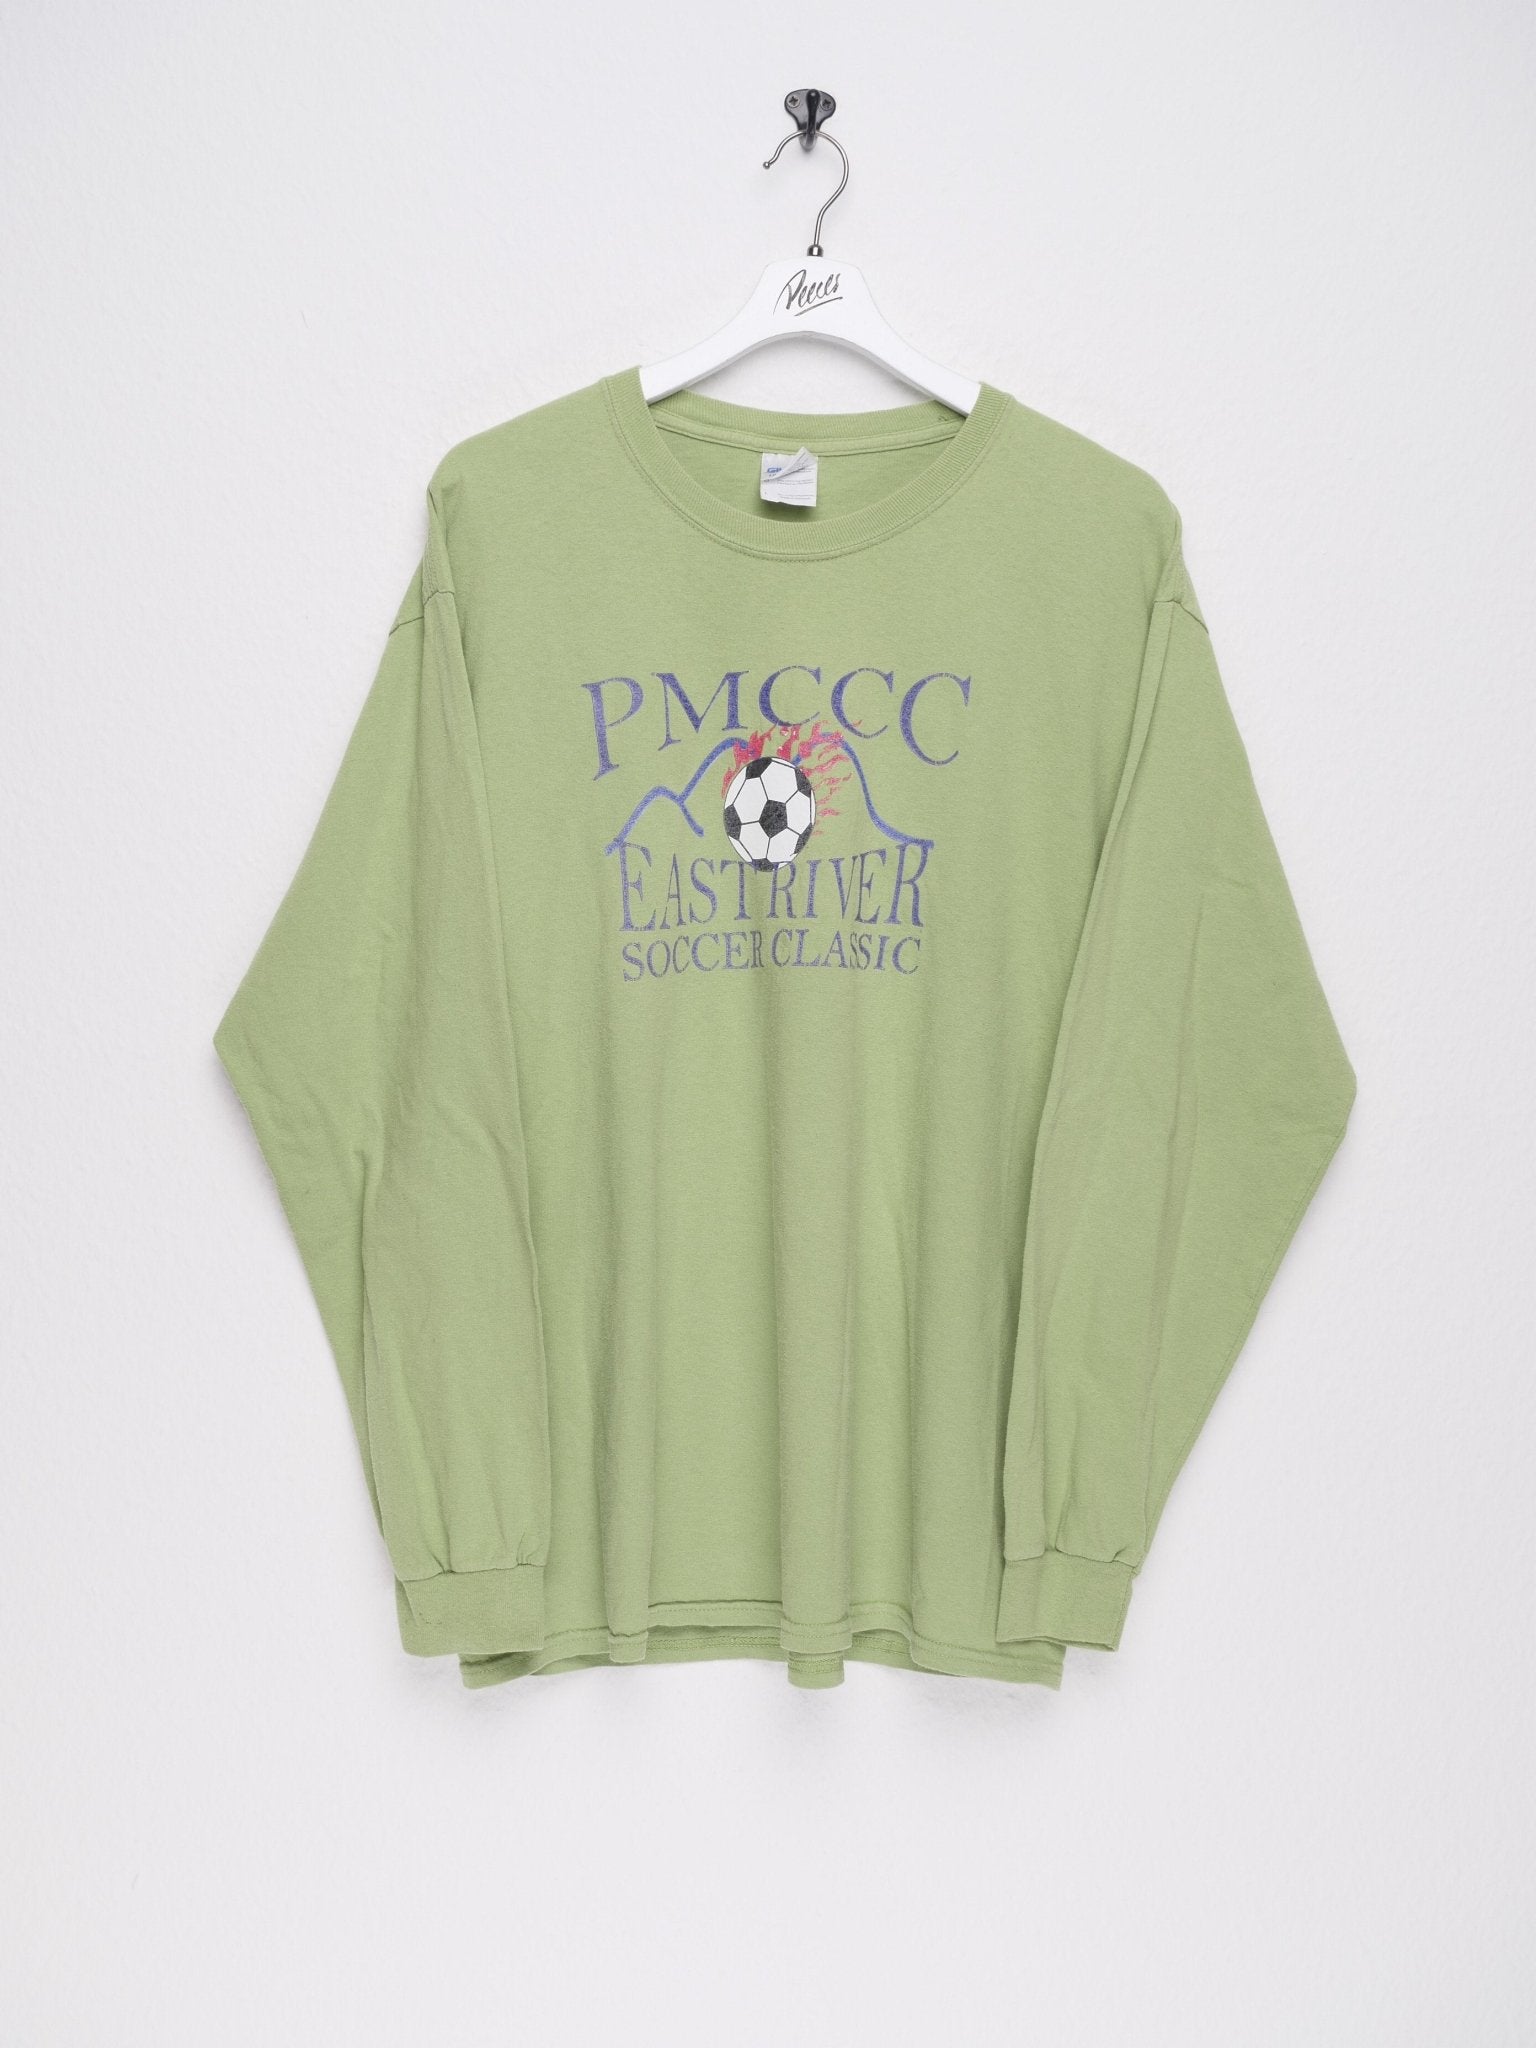 'PMCCC' printed Graphic green L/S Shirt - Peeces